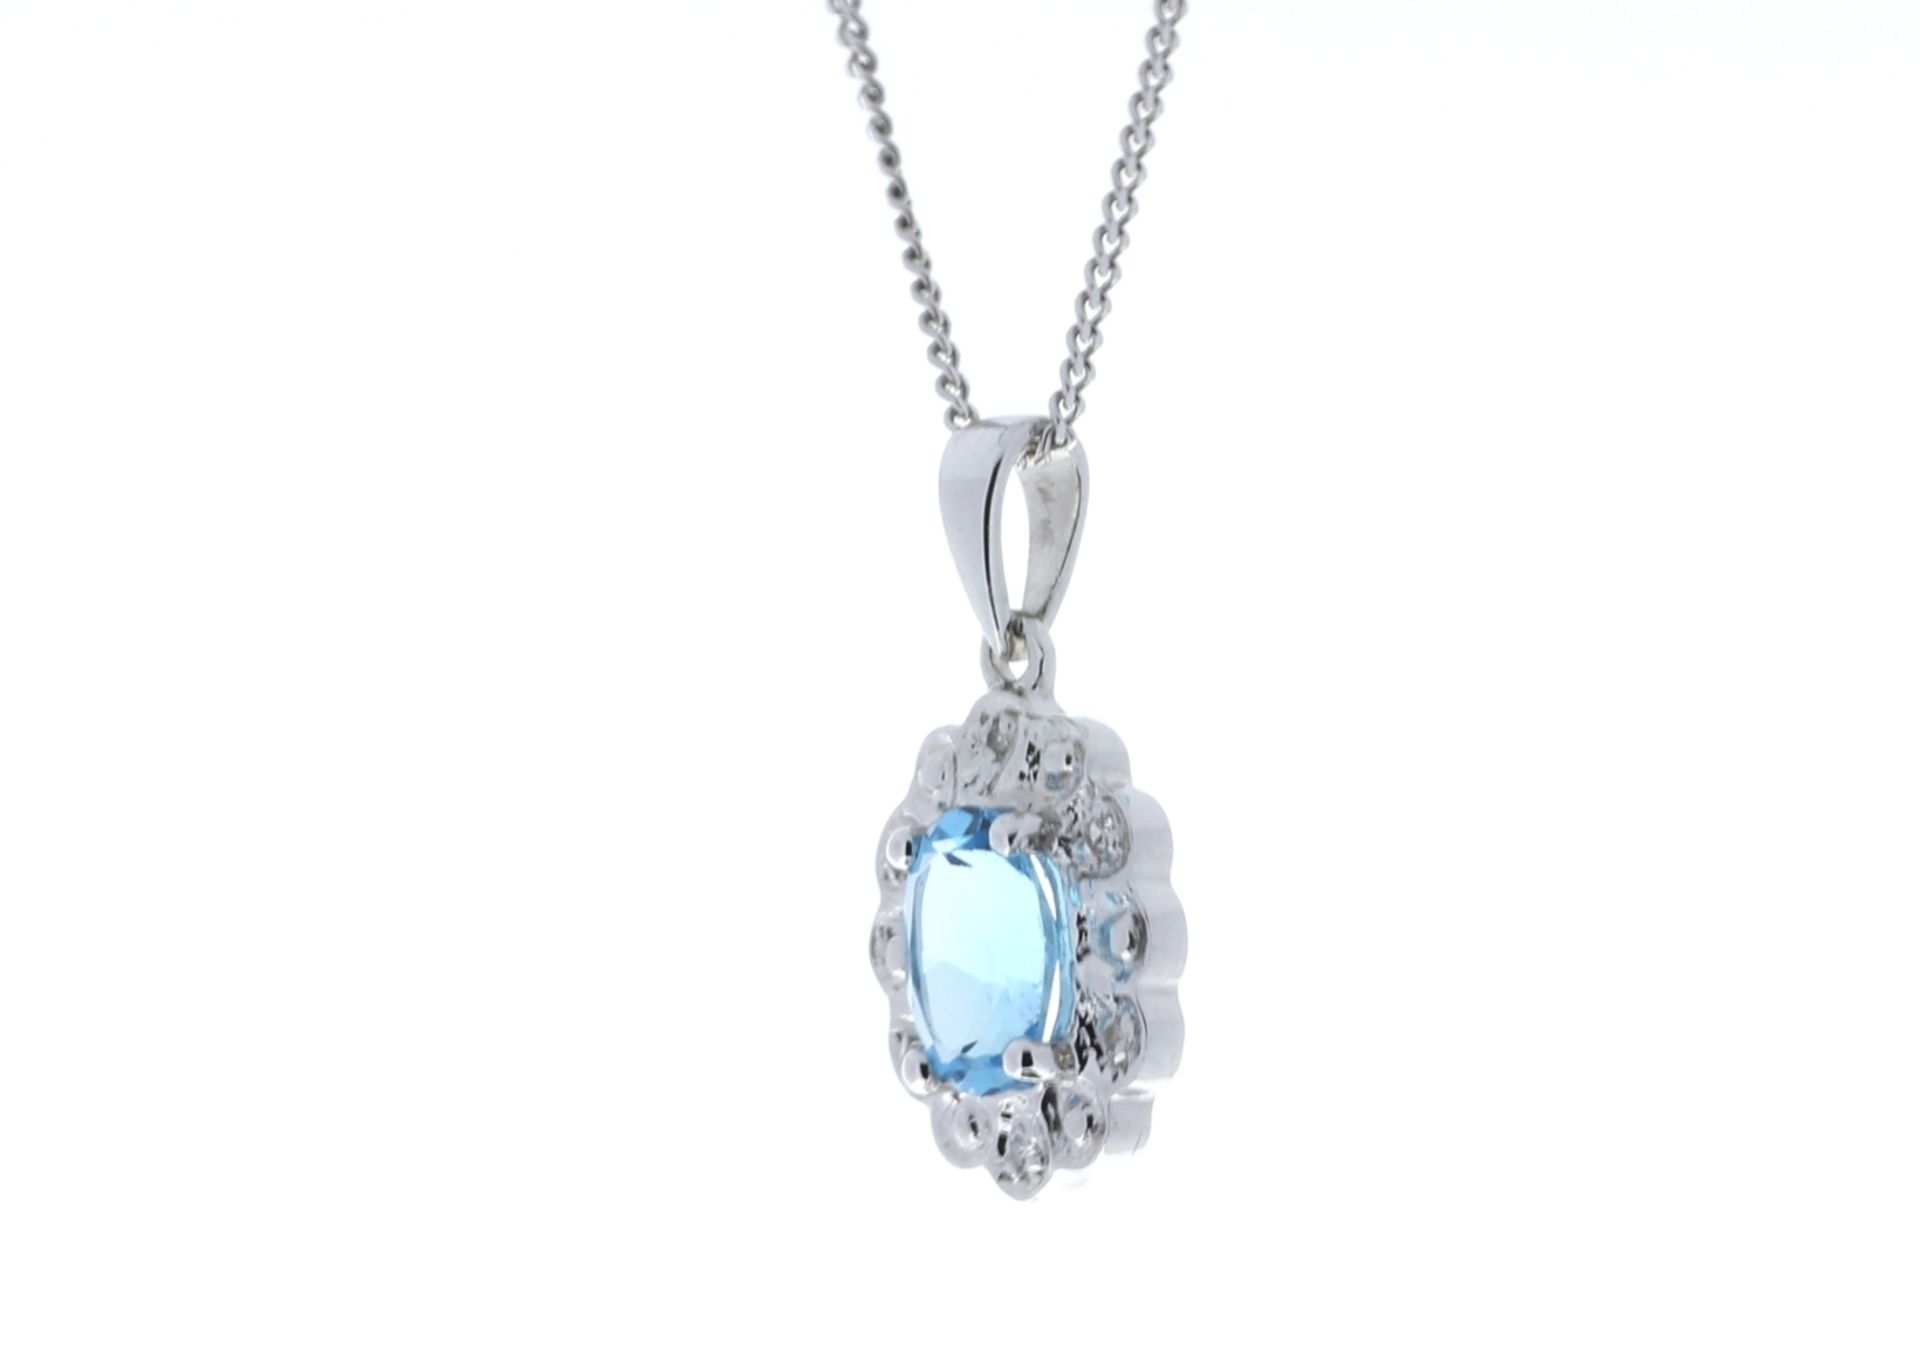 9ct White Gold Fancy Cluster Diamond Blue Topaz Pendant (BT0.86) 0.02 Carats - Valued By AGI £950.00 - Image 4 of 6